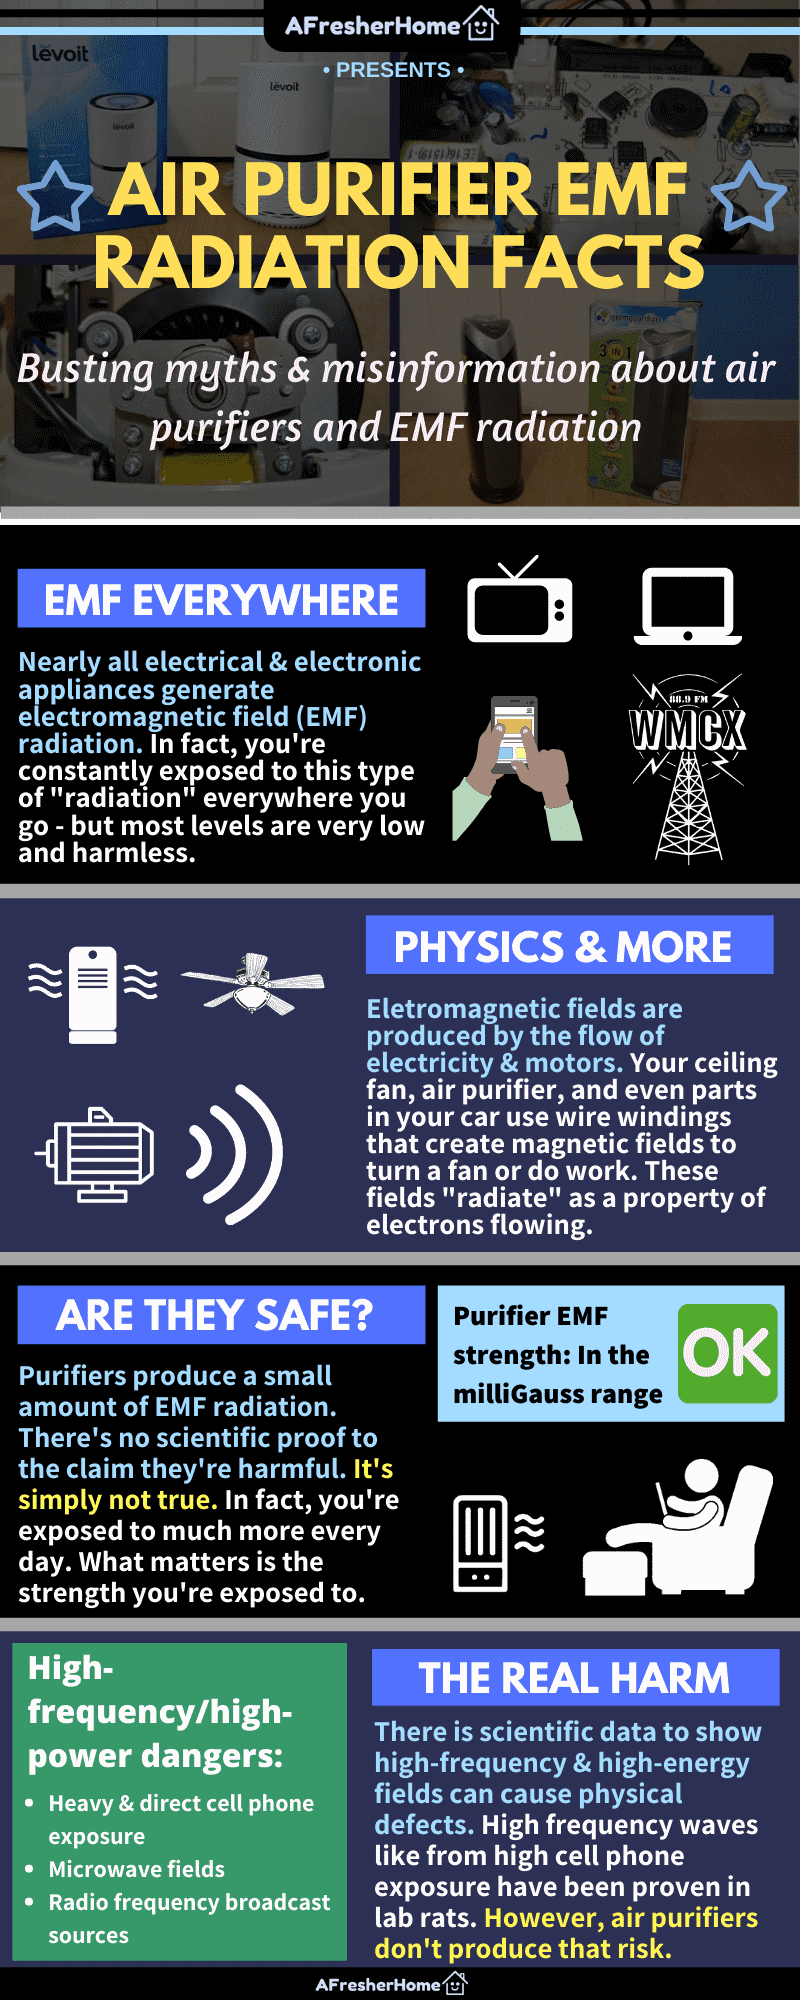 Infographic for air purifier radiation facts and myths